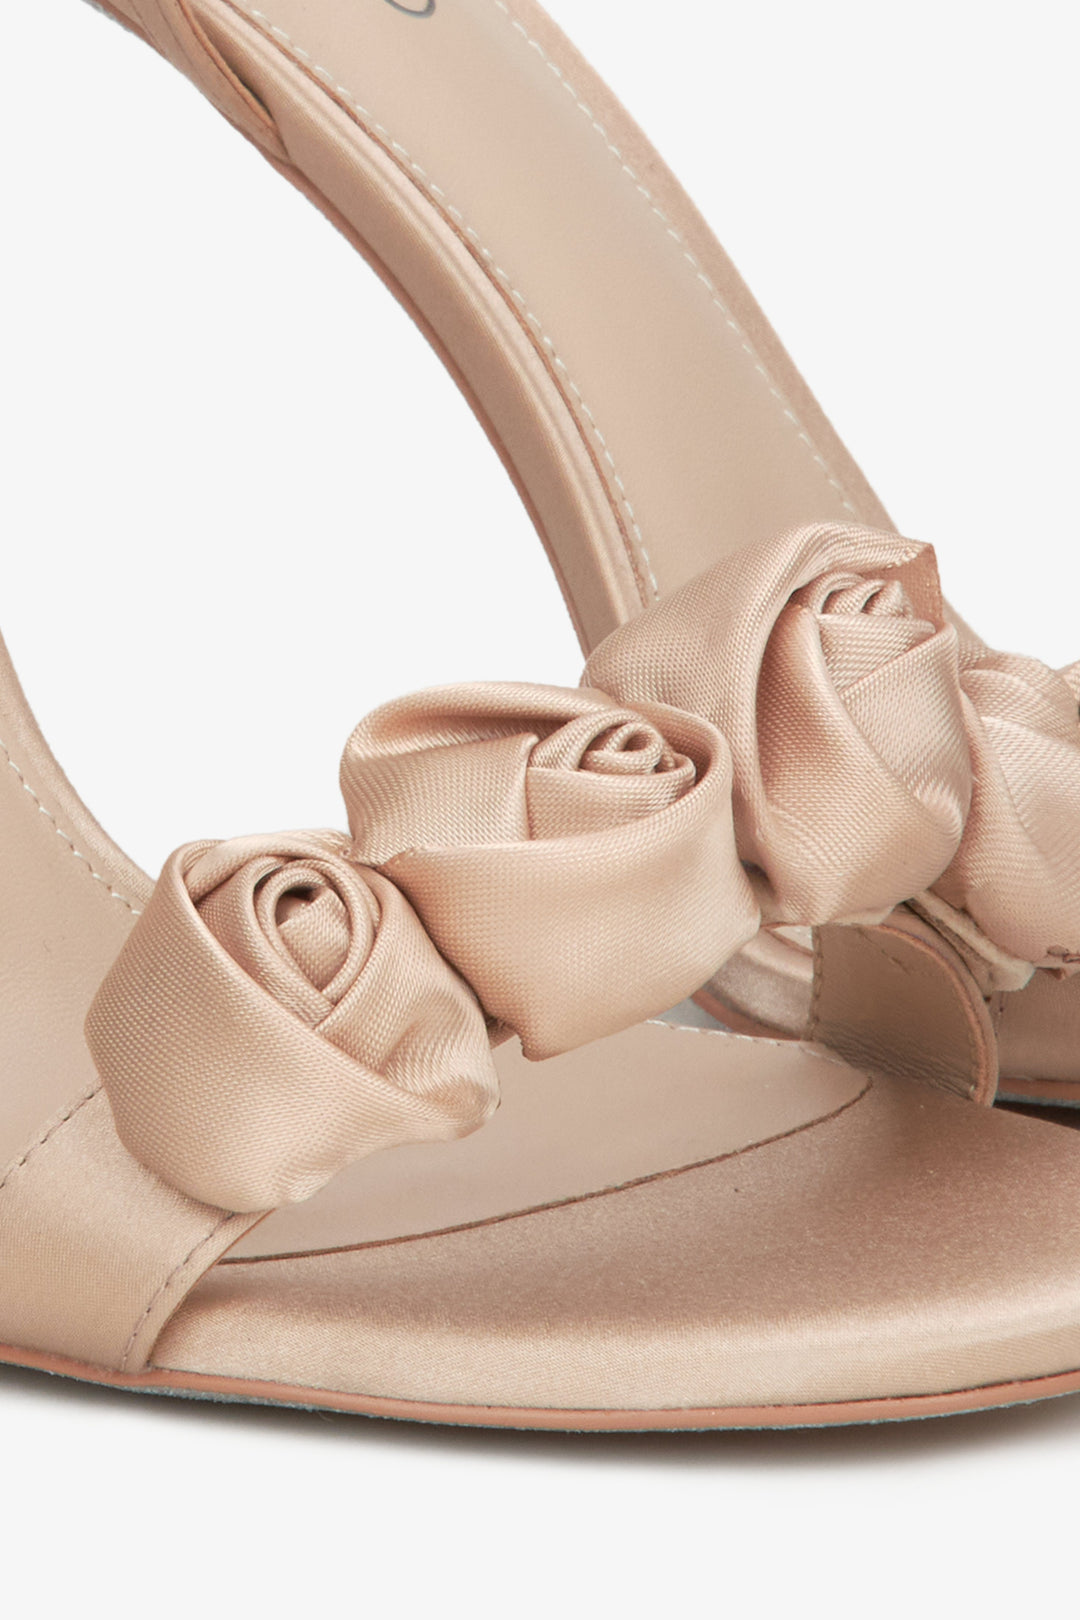 Women's beige high-heeled sandals - close-up on the ornament.